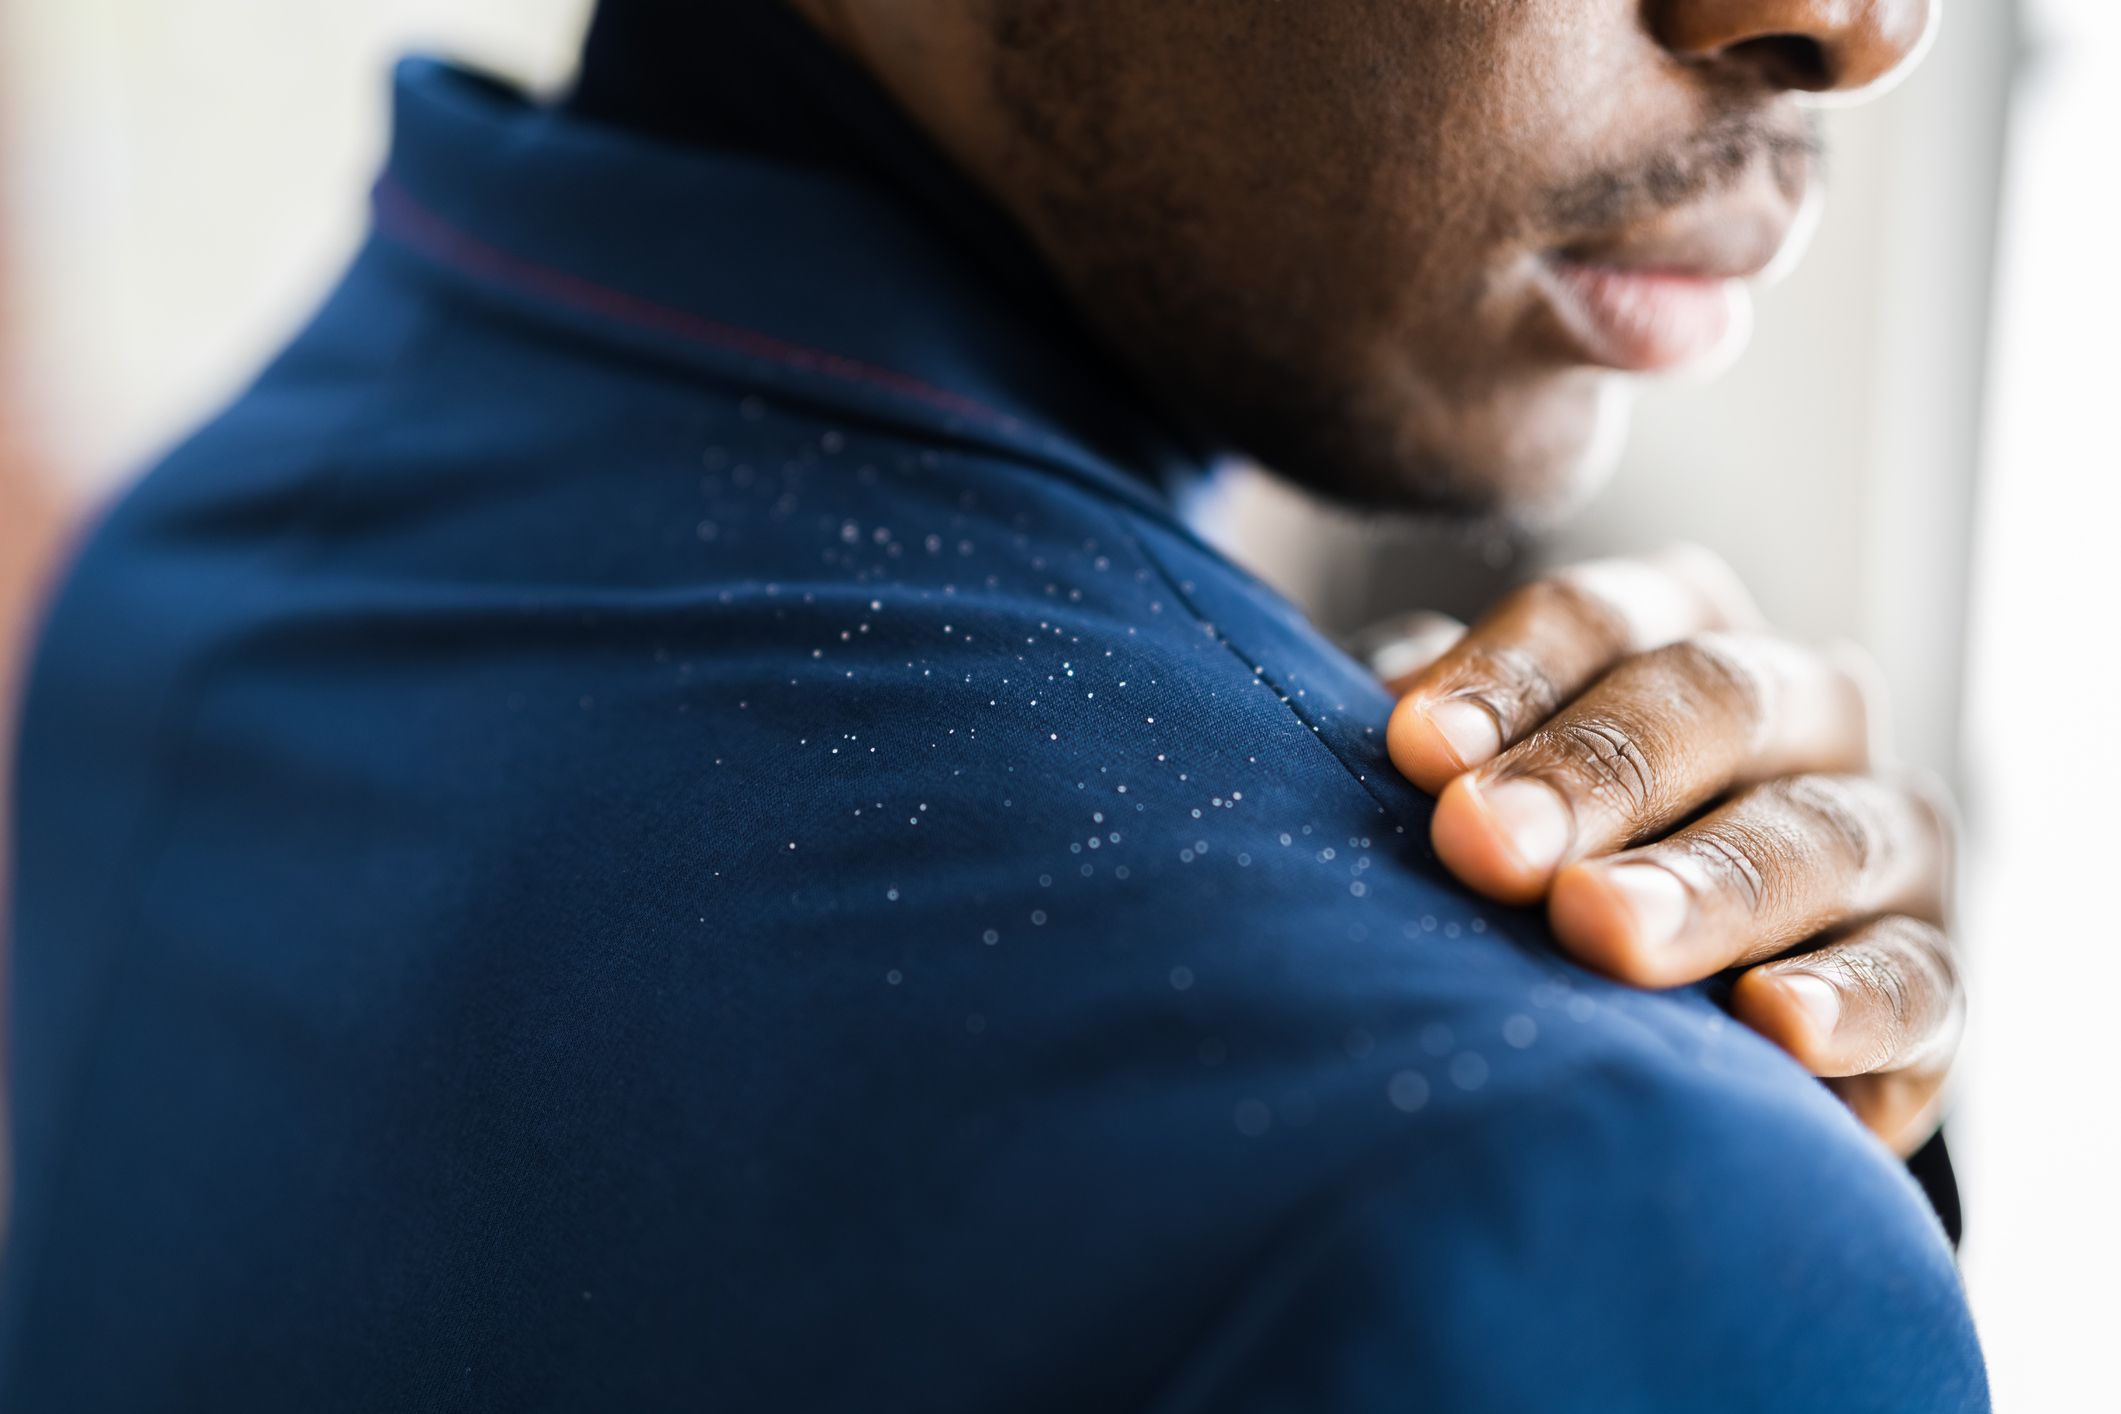 <p>Dandruff and seborrheic dermatitis <a href="https://www.ncbi.nlm.nih.gov/pmc/articles/PMC4852869/">typically affect</a> infants, teens going through puberty and those in mid-adulthood. They present as dry, itchy, flaking skin because they affect the oil-producing areas of the body.</p><p><a href="https://www.ncbi.nlm.nih.gov/pmc/articles/PMC4852869/">These symptoms</a> again can indicate low zinc or niacin levels, or possibly low riboflavin (B2) and pyridoxine (B6). To <a href="https://ods.od.nih.gov/factsheets/Thiamin-HealthProfessional/">increase your levels</a> of these nutrients, try eating whole grains, poultry, meat, fish, eggs, dairy or starchy vegetables.</p>